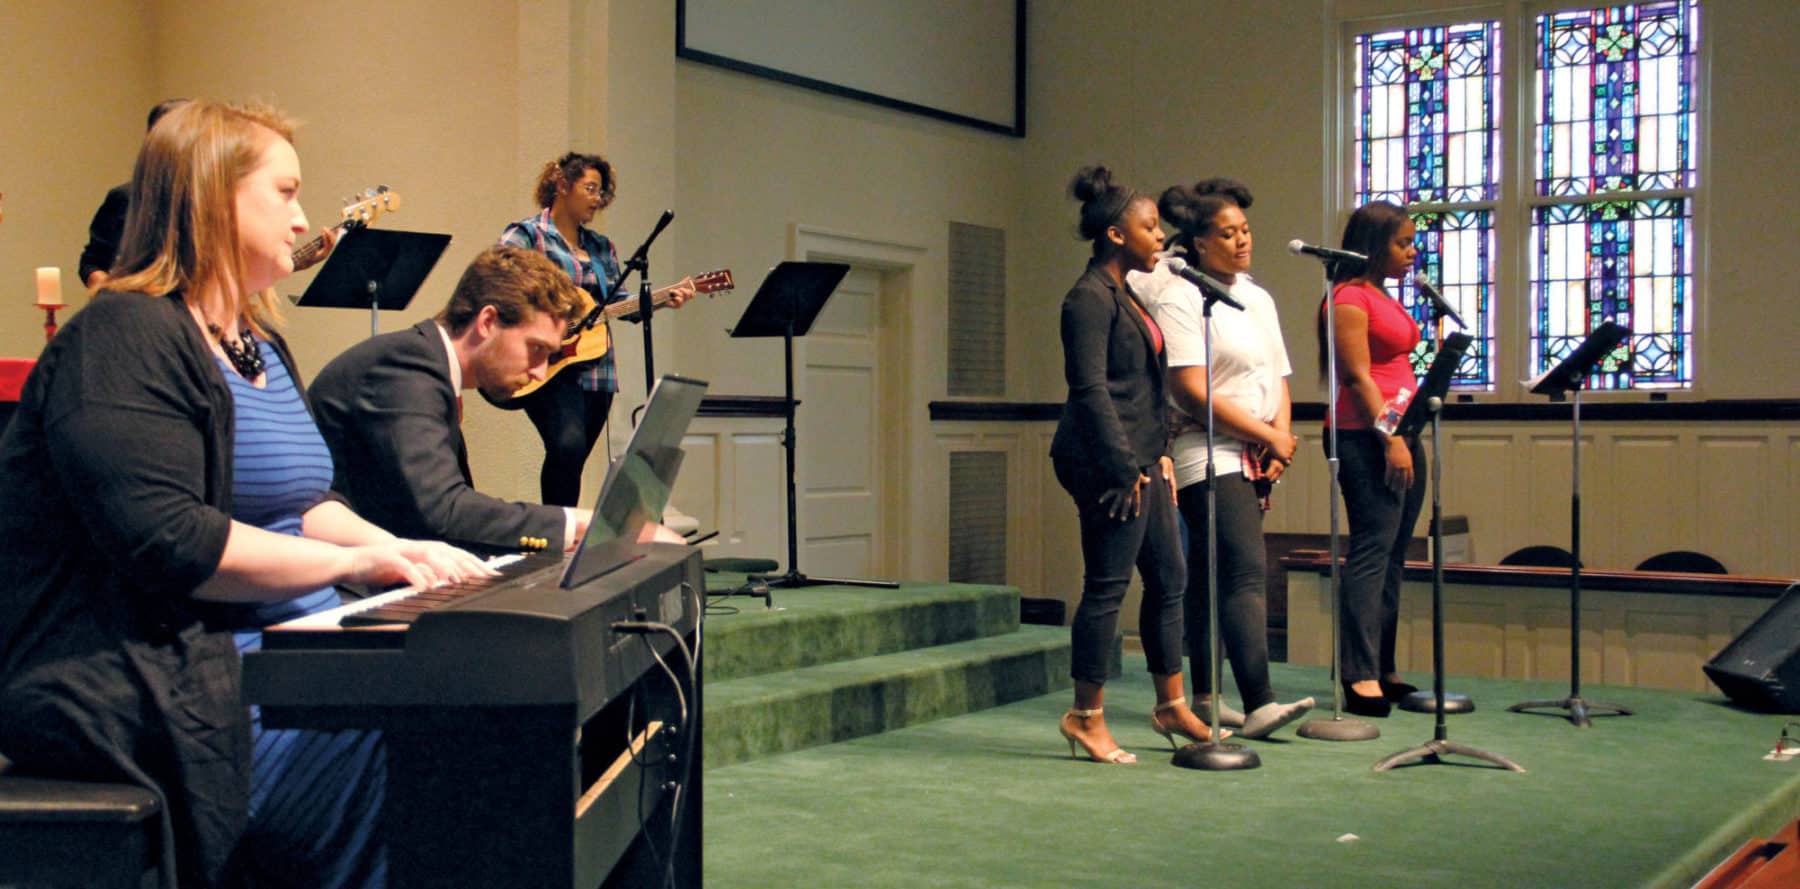 MCH Students Leading Worship